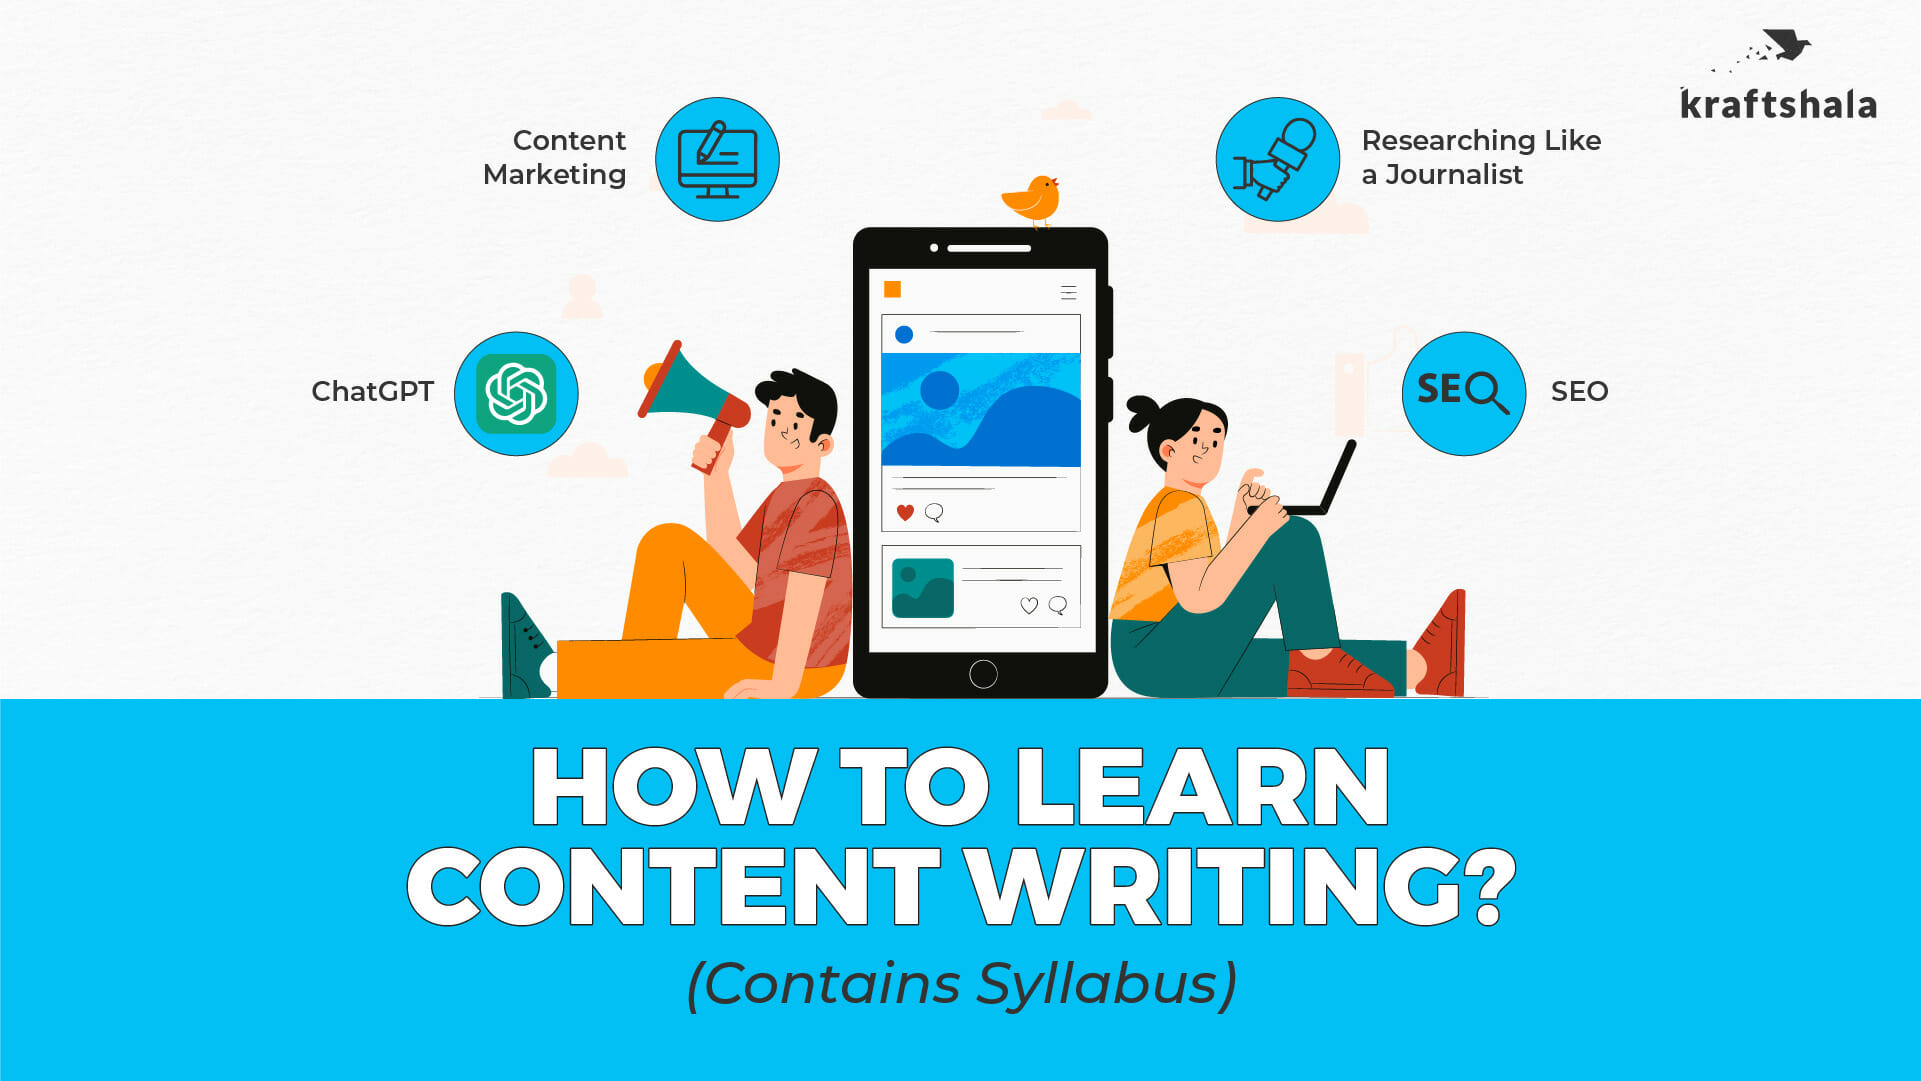 How to Learn Content Writing? (Includes Course Syllabus)